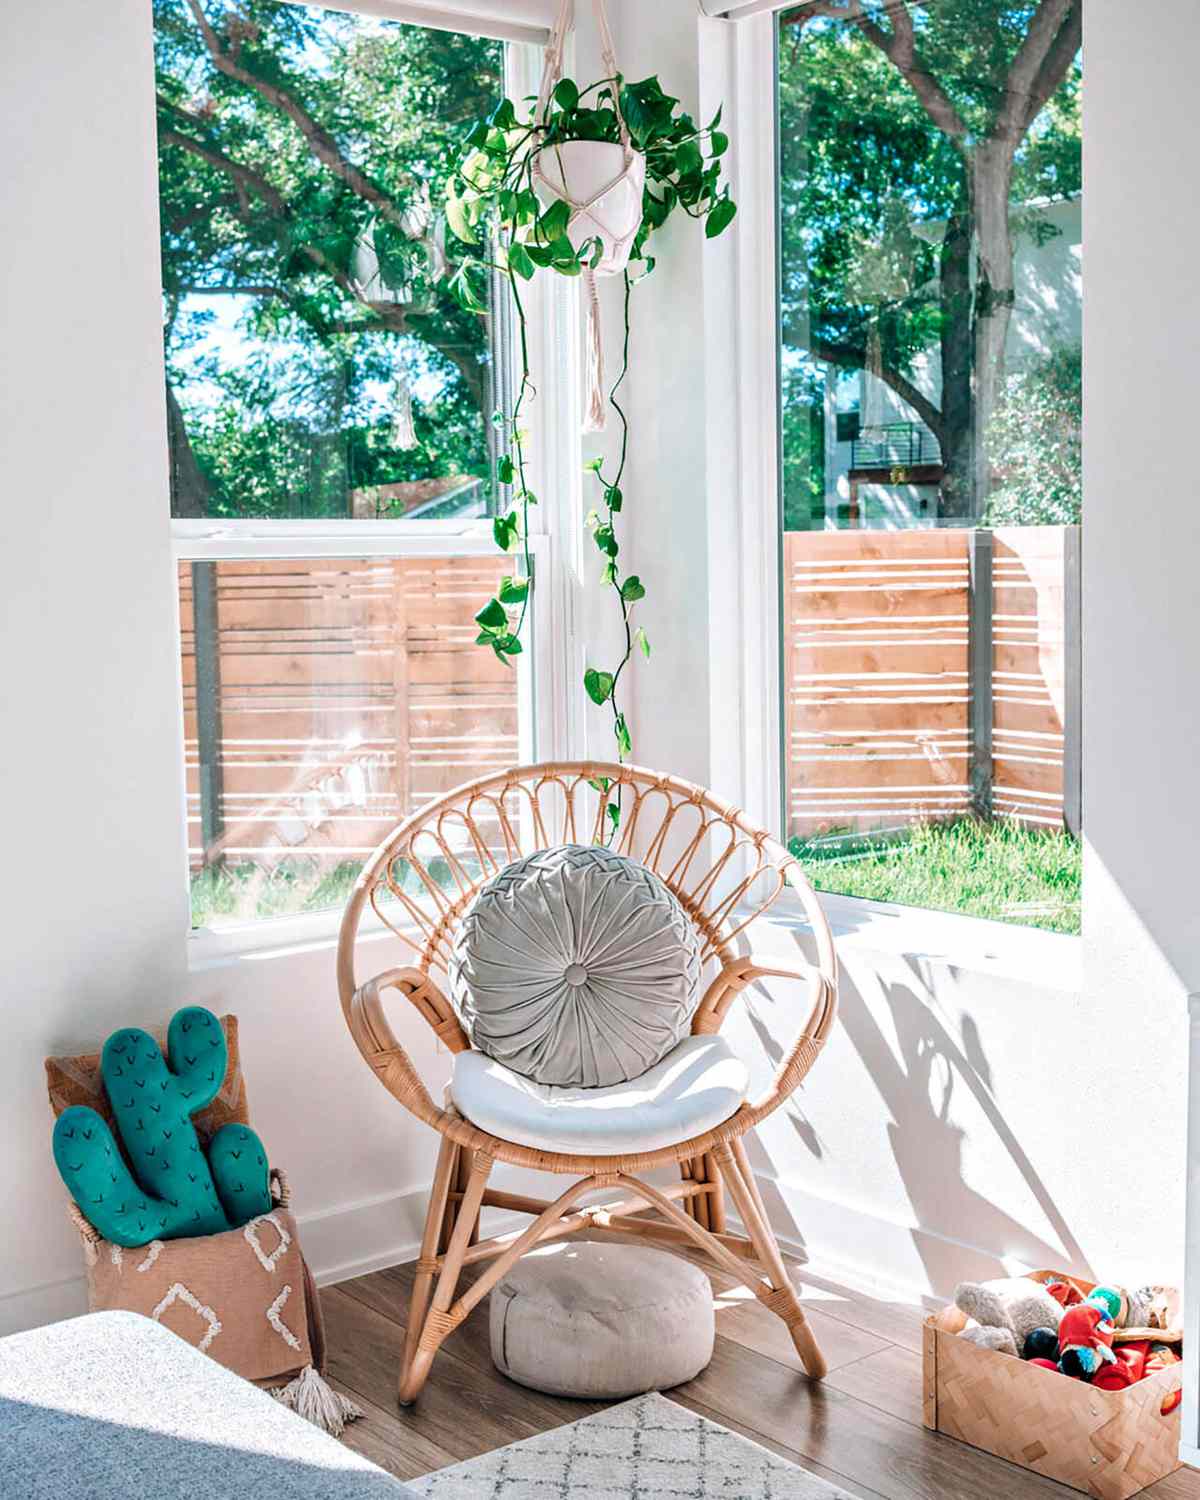 Rattan chair in corner of white living room with hanging plant above